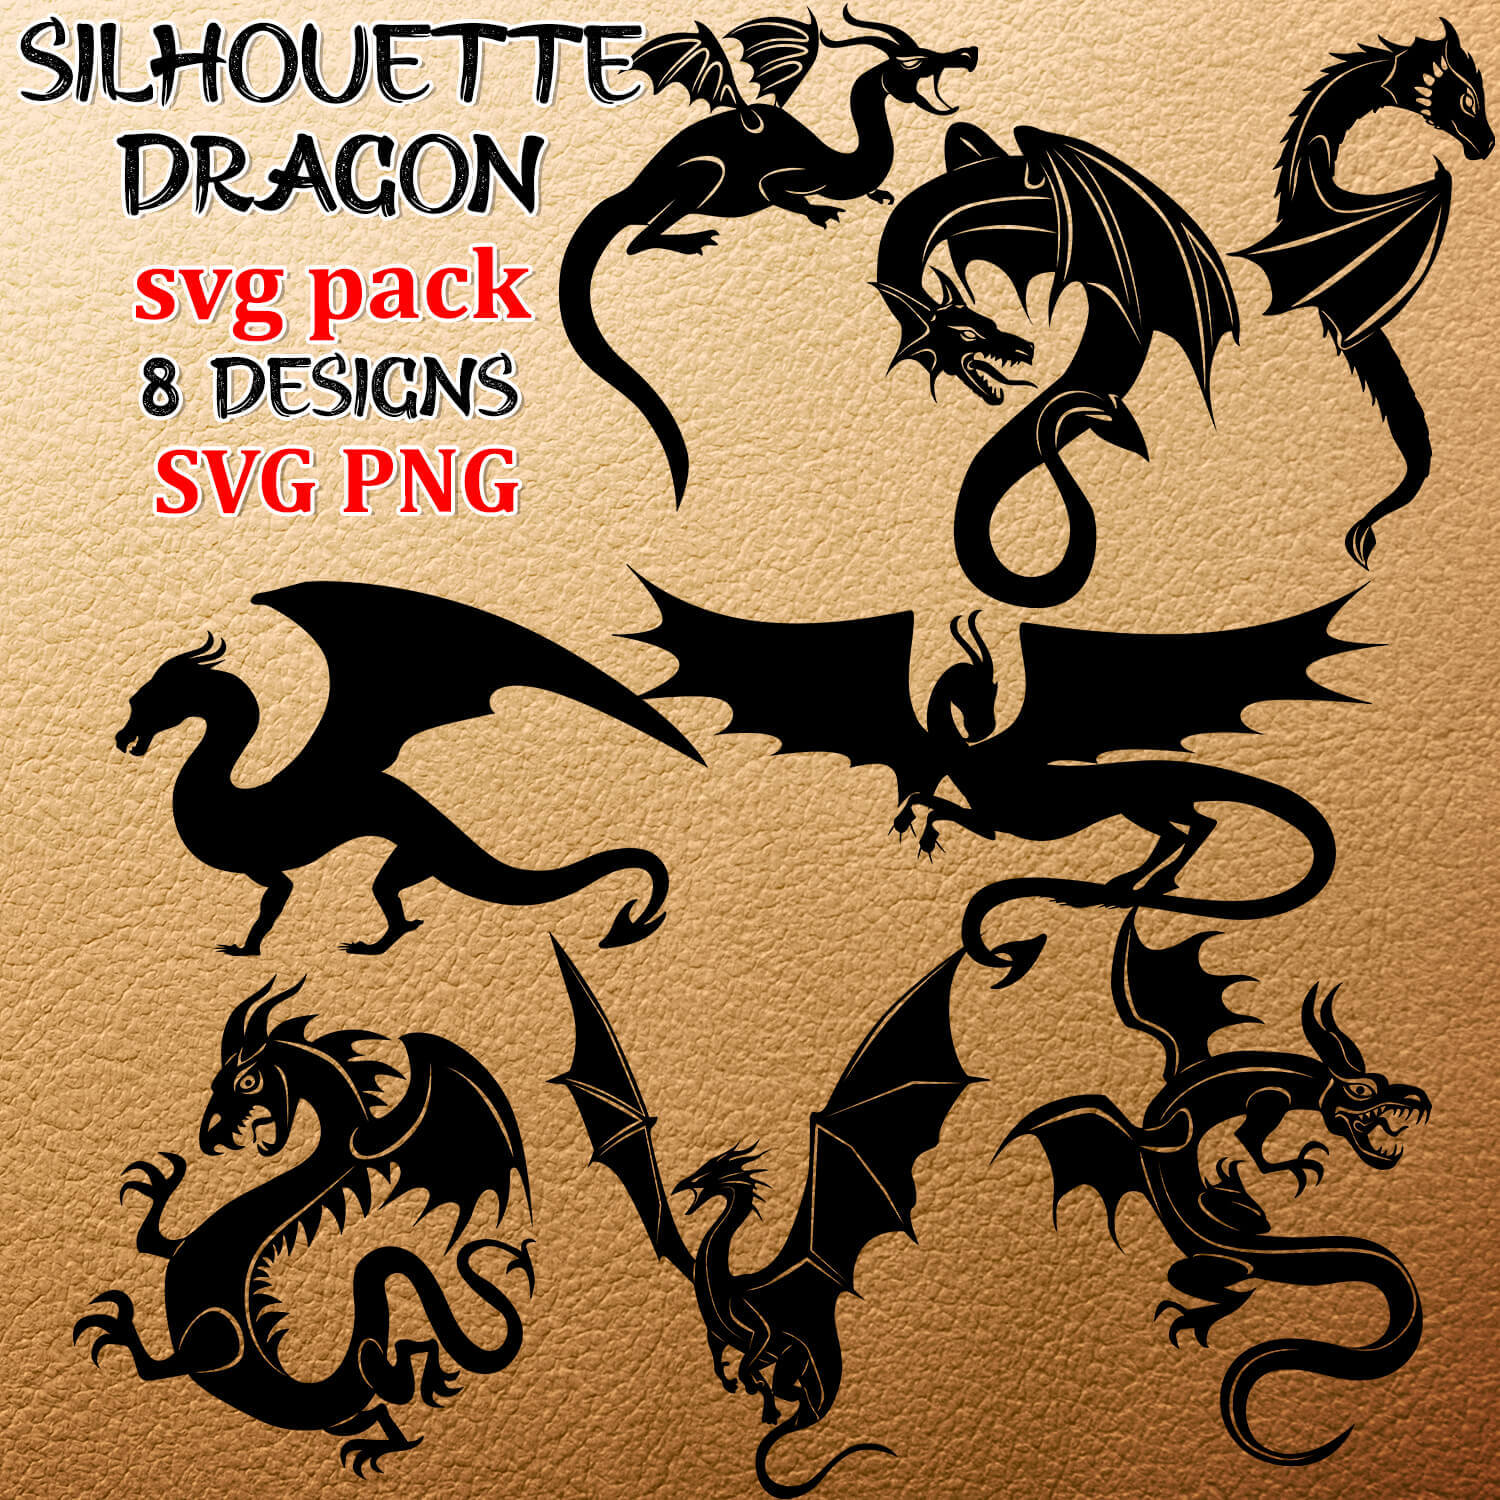 Black silhouettes of dragons with wings are depicted on light skin.